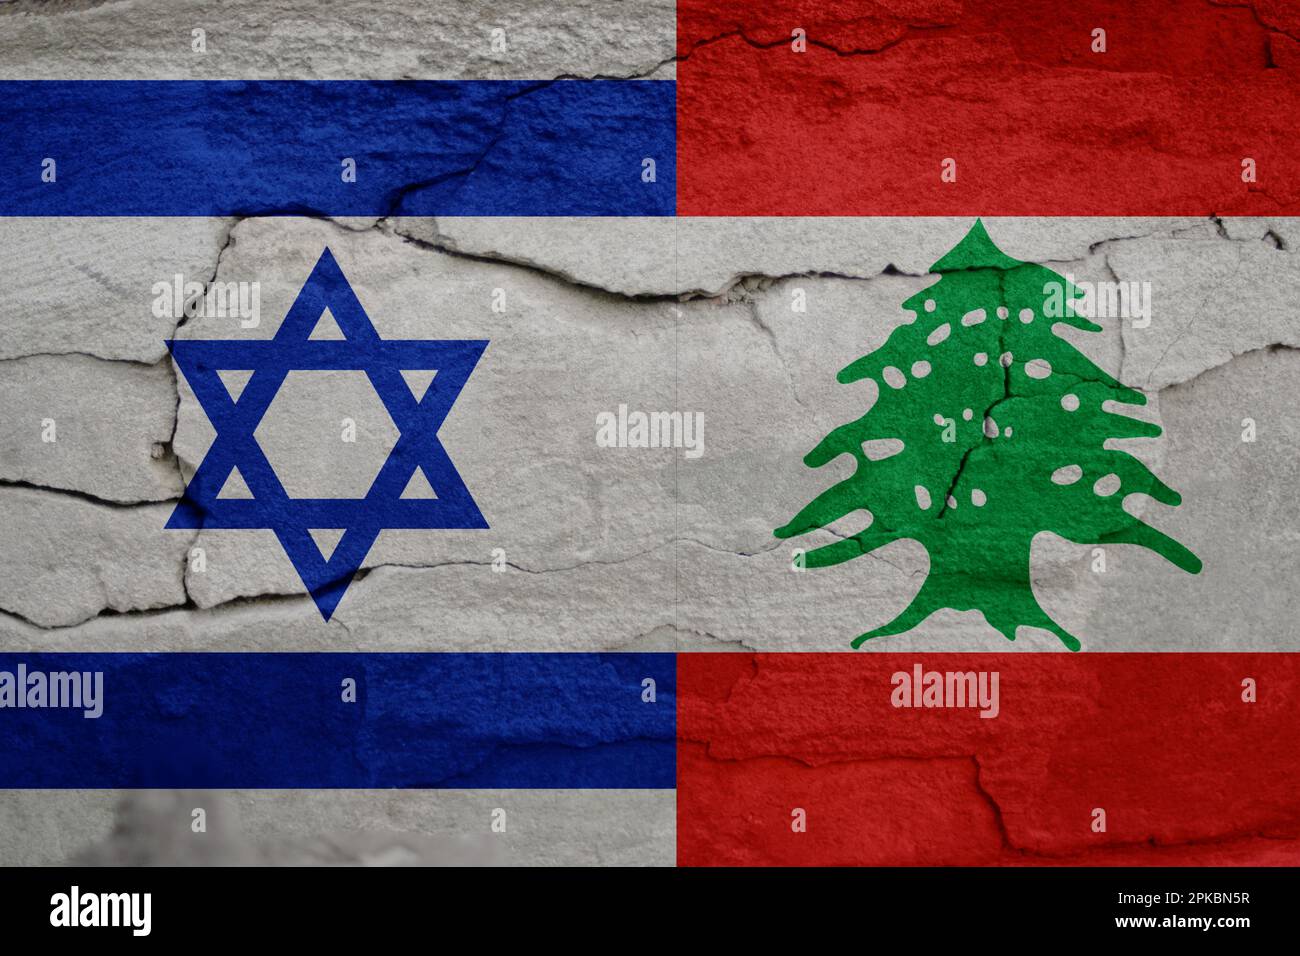 Israel Lebanon war. Flags of Israel and Palestine on cracked stone background. Concept of the Conflict between Israel and the Palestinian Authorities. Stock Photo